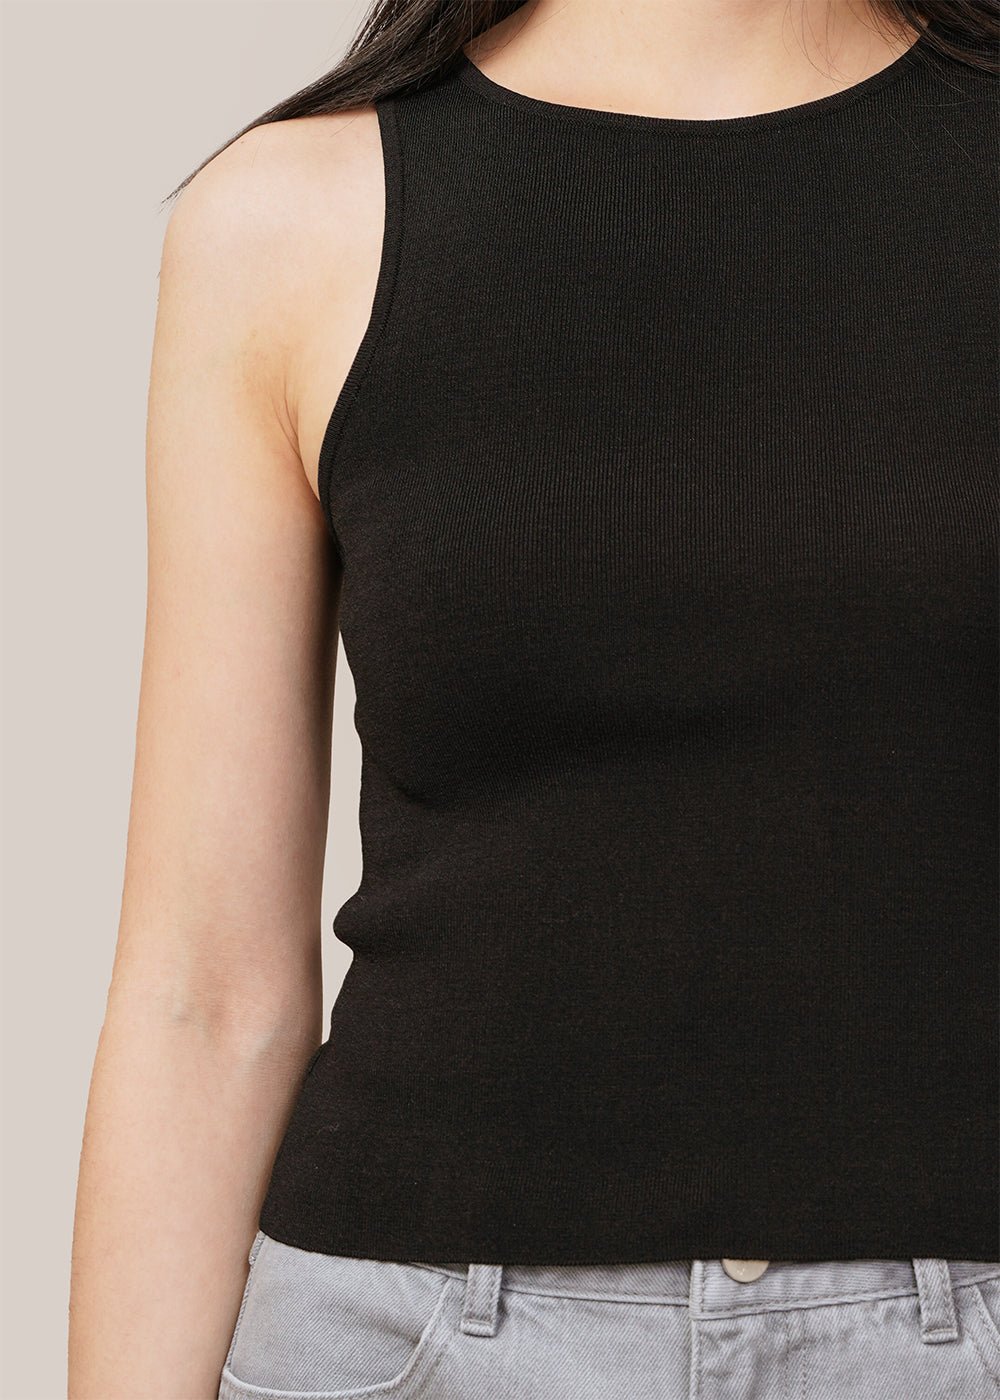 AMOMENTO Black Cut-Out Sleeveless Top - New Classics Studios Sustainable Ethical Fashion Canada